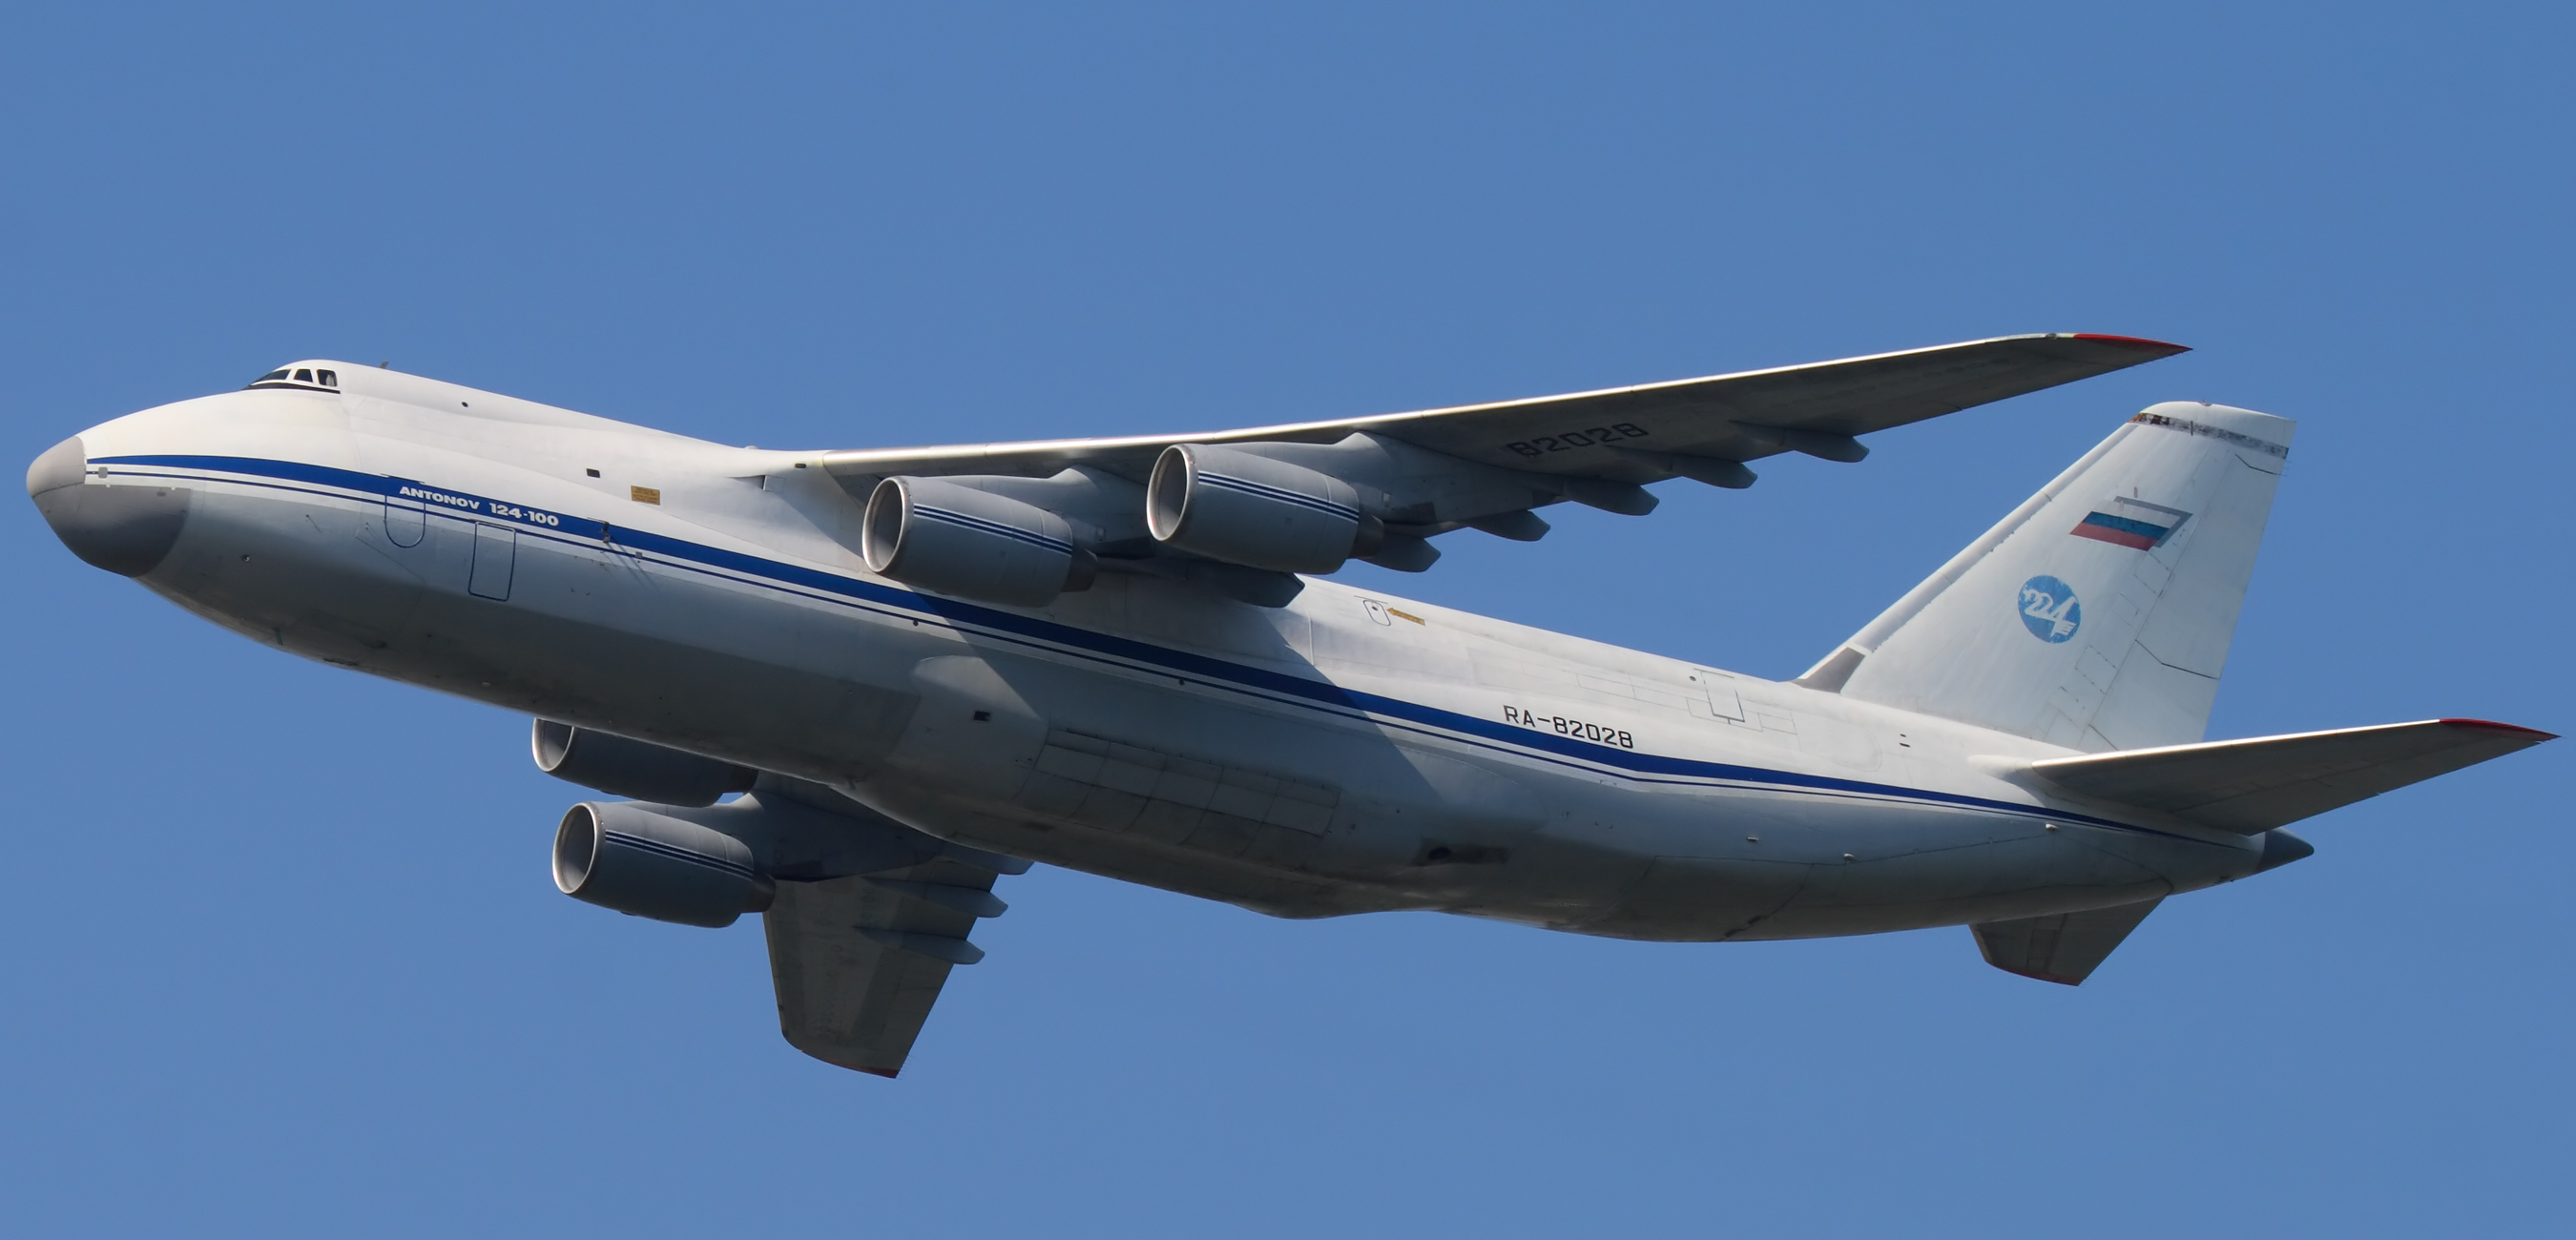 An-124_RA-82028_in_formation_with_Su-27_09-May-2010_%28cropped%29.jpg